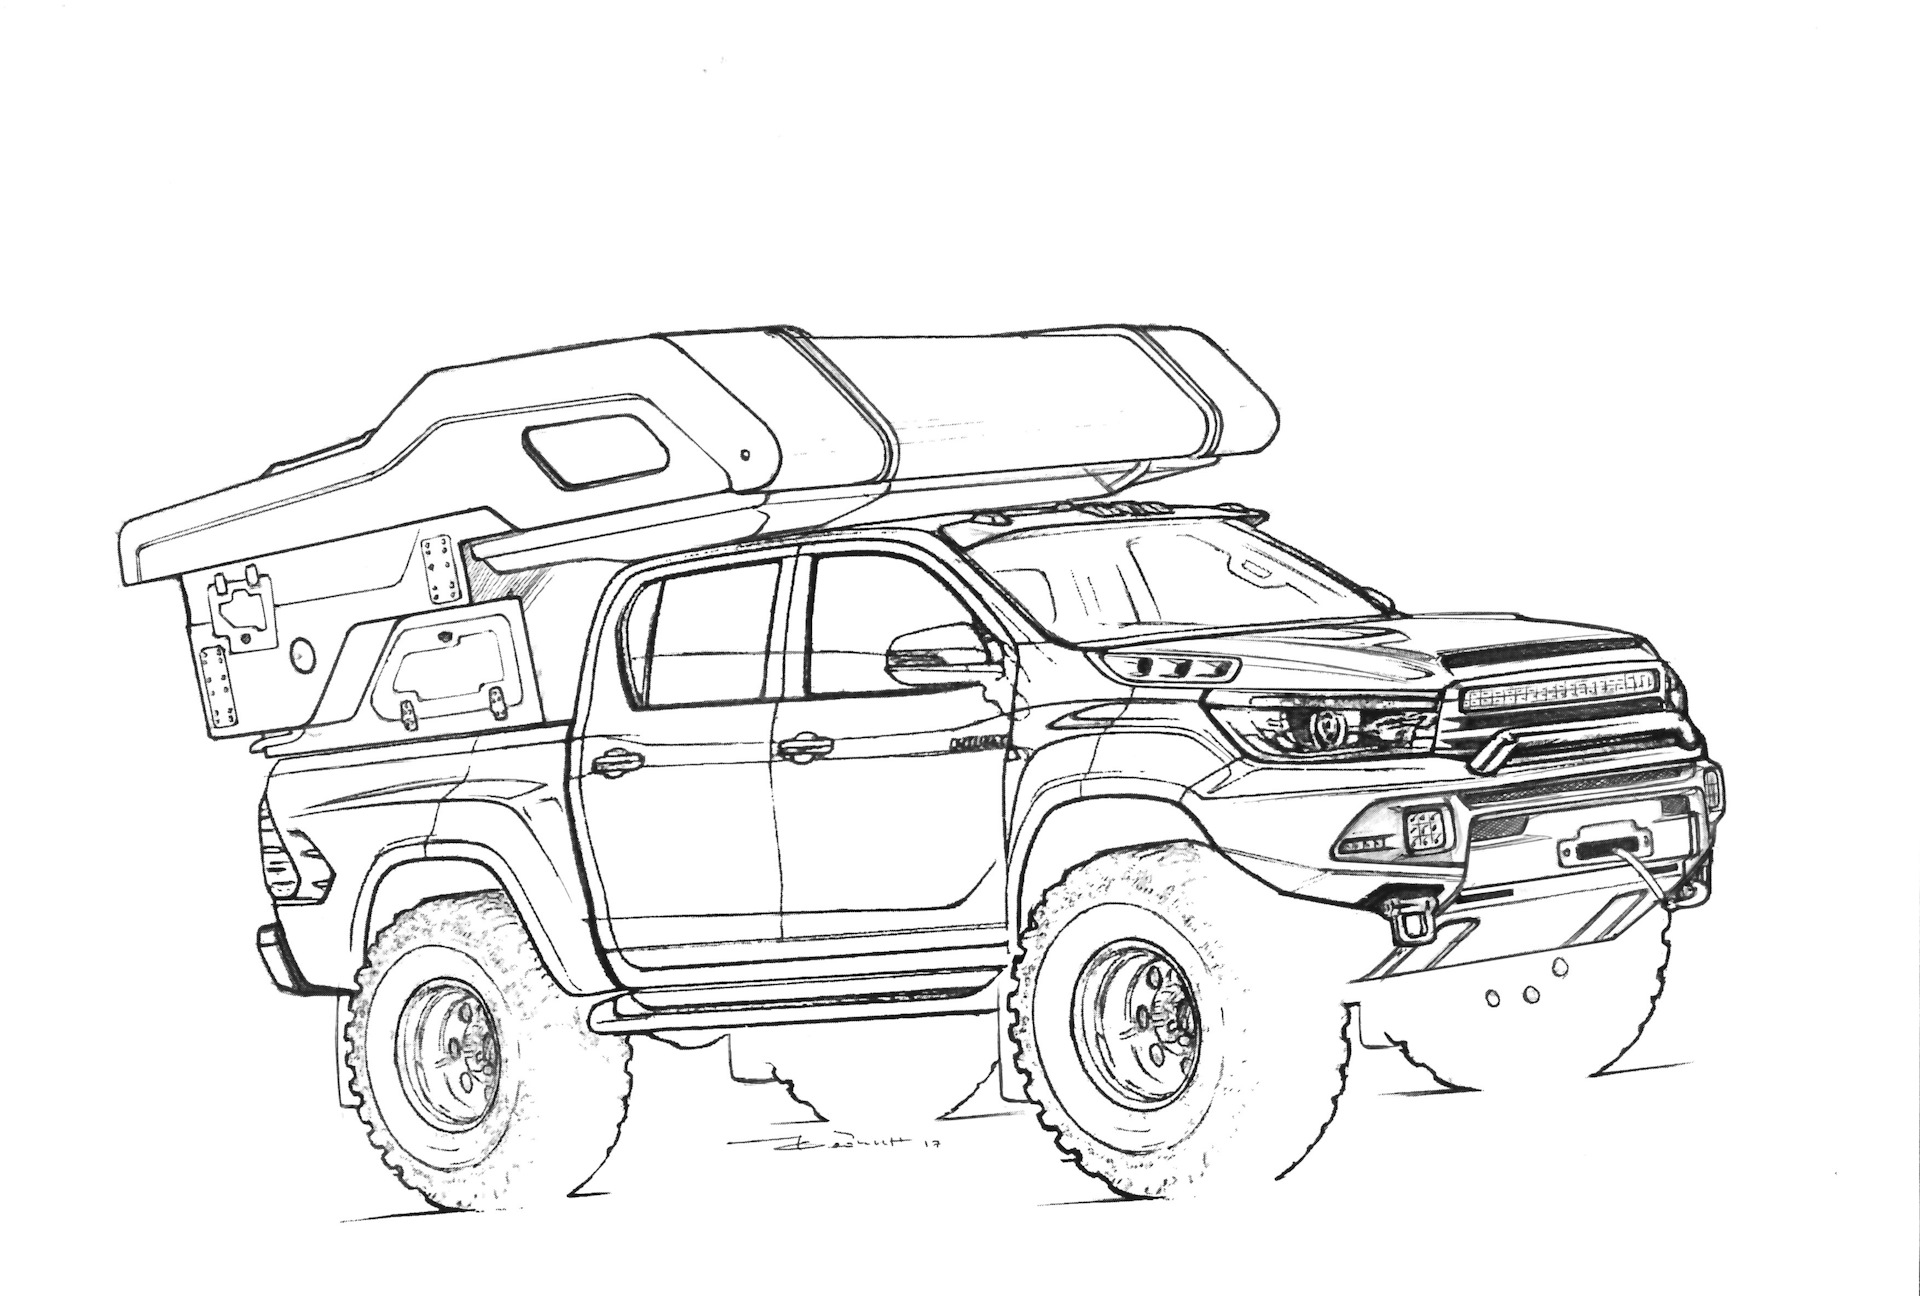 Toyota Hilux drawings